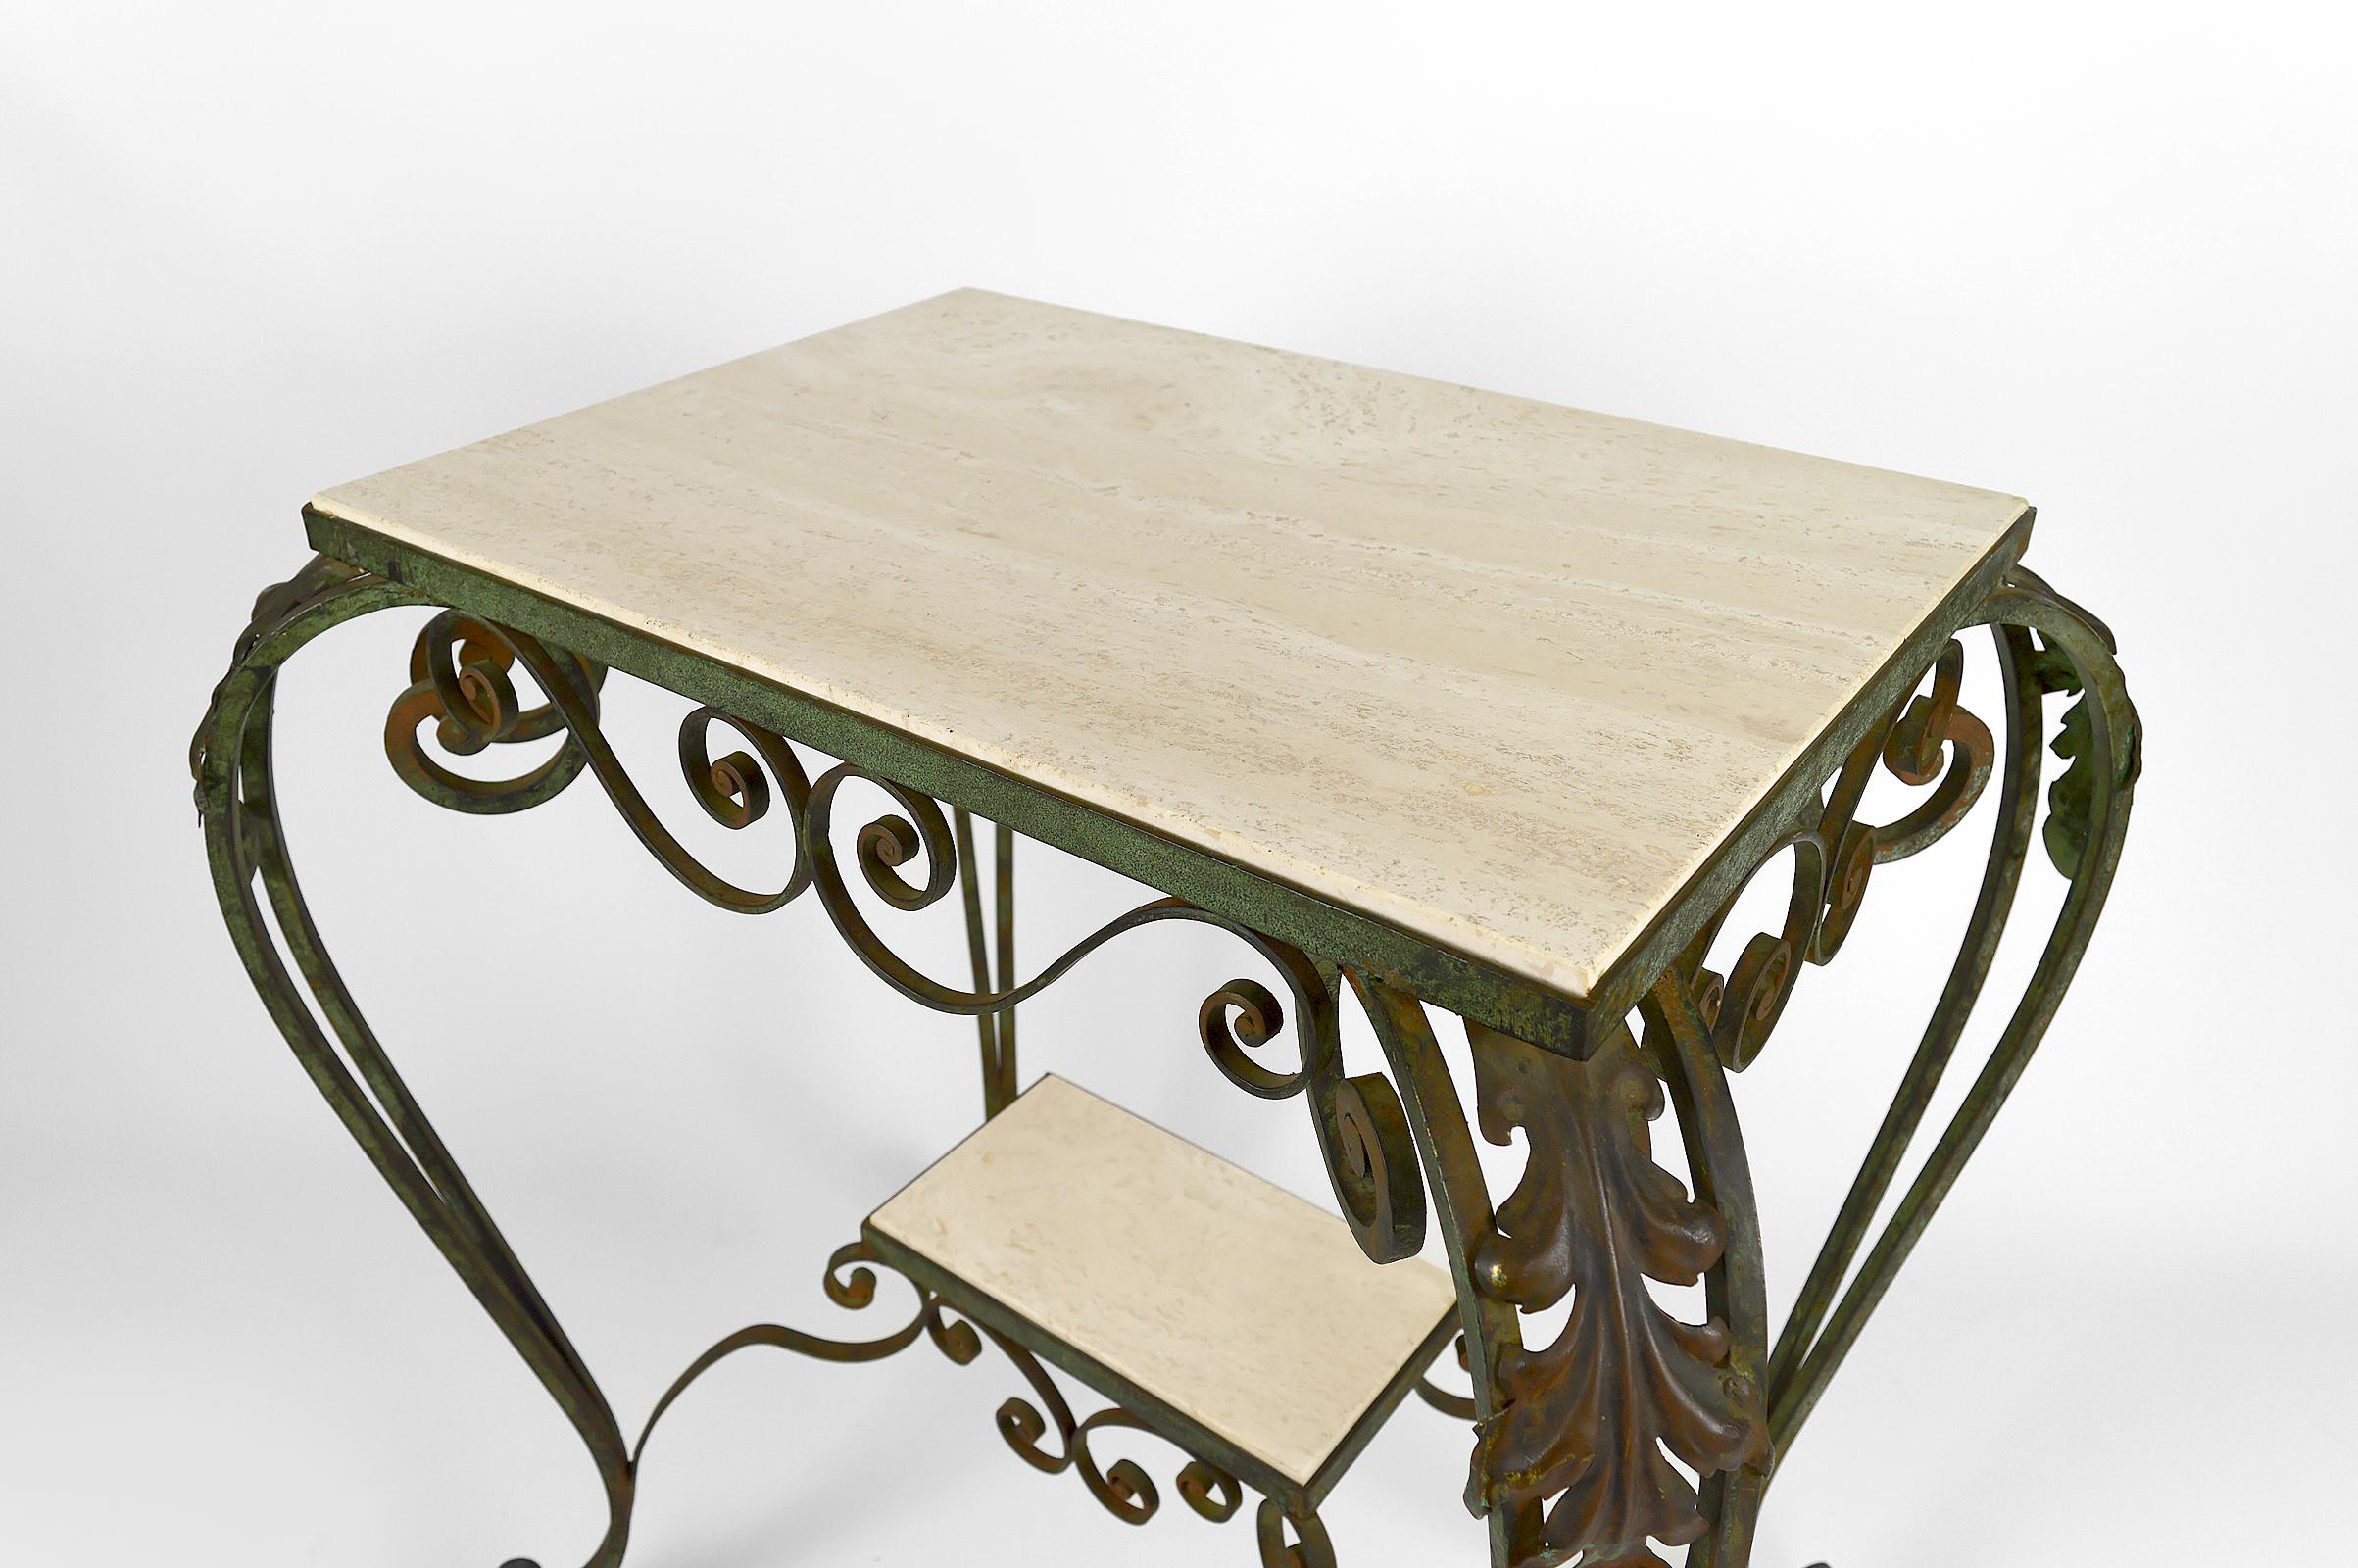 Art Deco Rolling Service Table in Wrought Iron and Travertine, France, 1940s For Sale 7